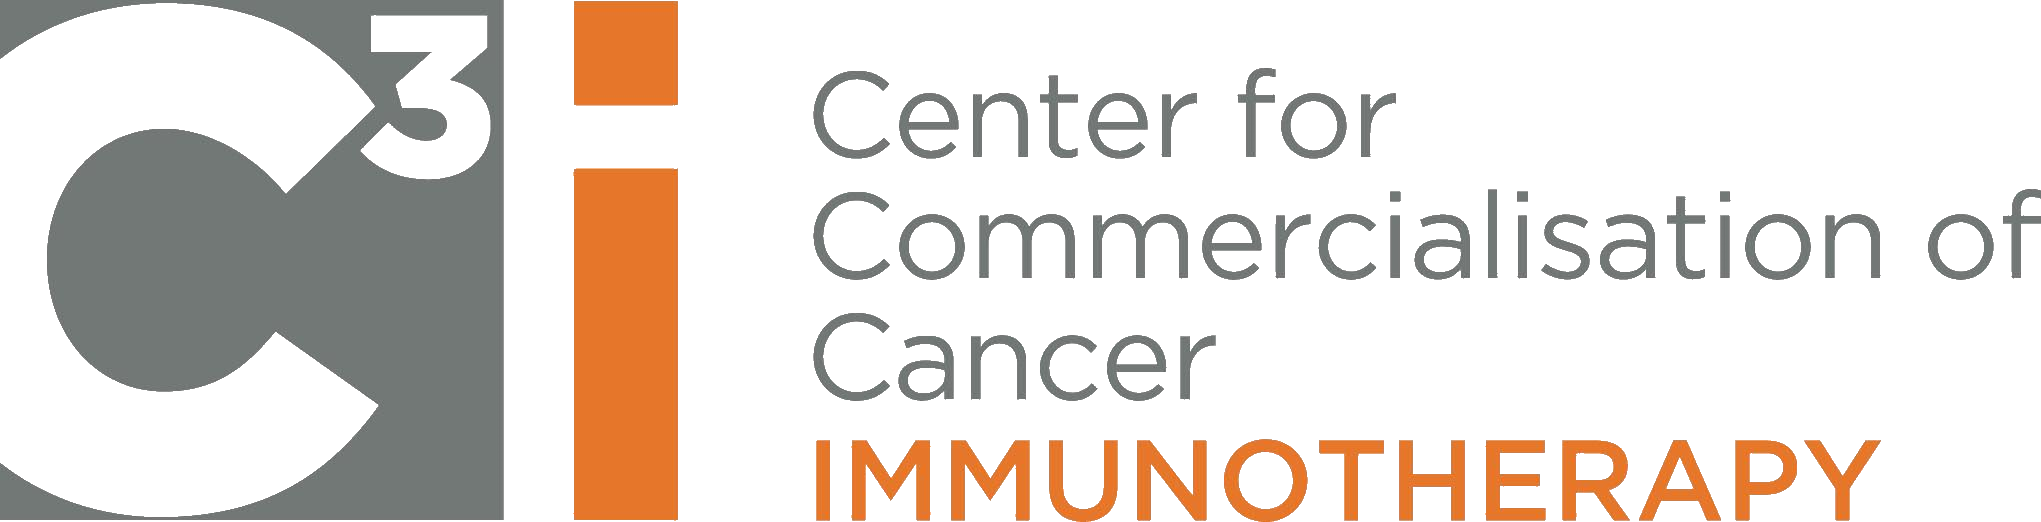 Centre for Commercialization of Cancer Immunotherapy (C3i)